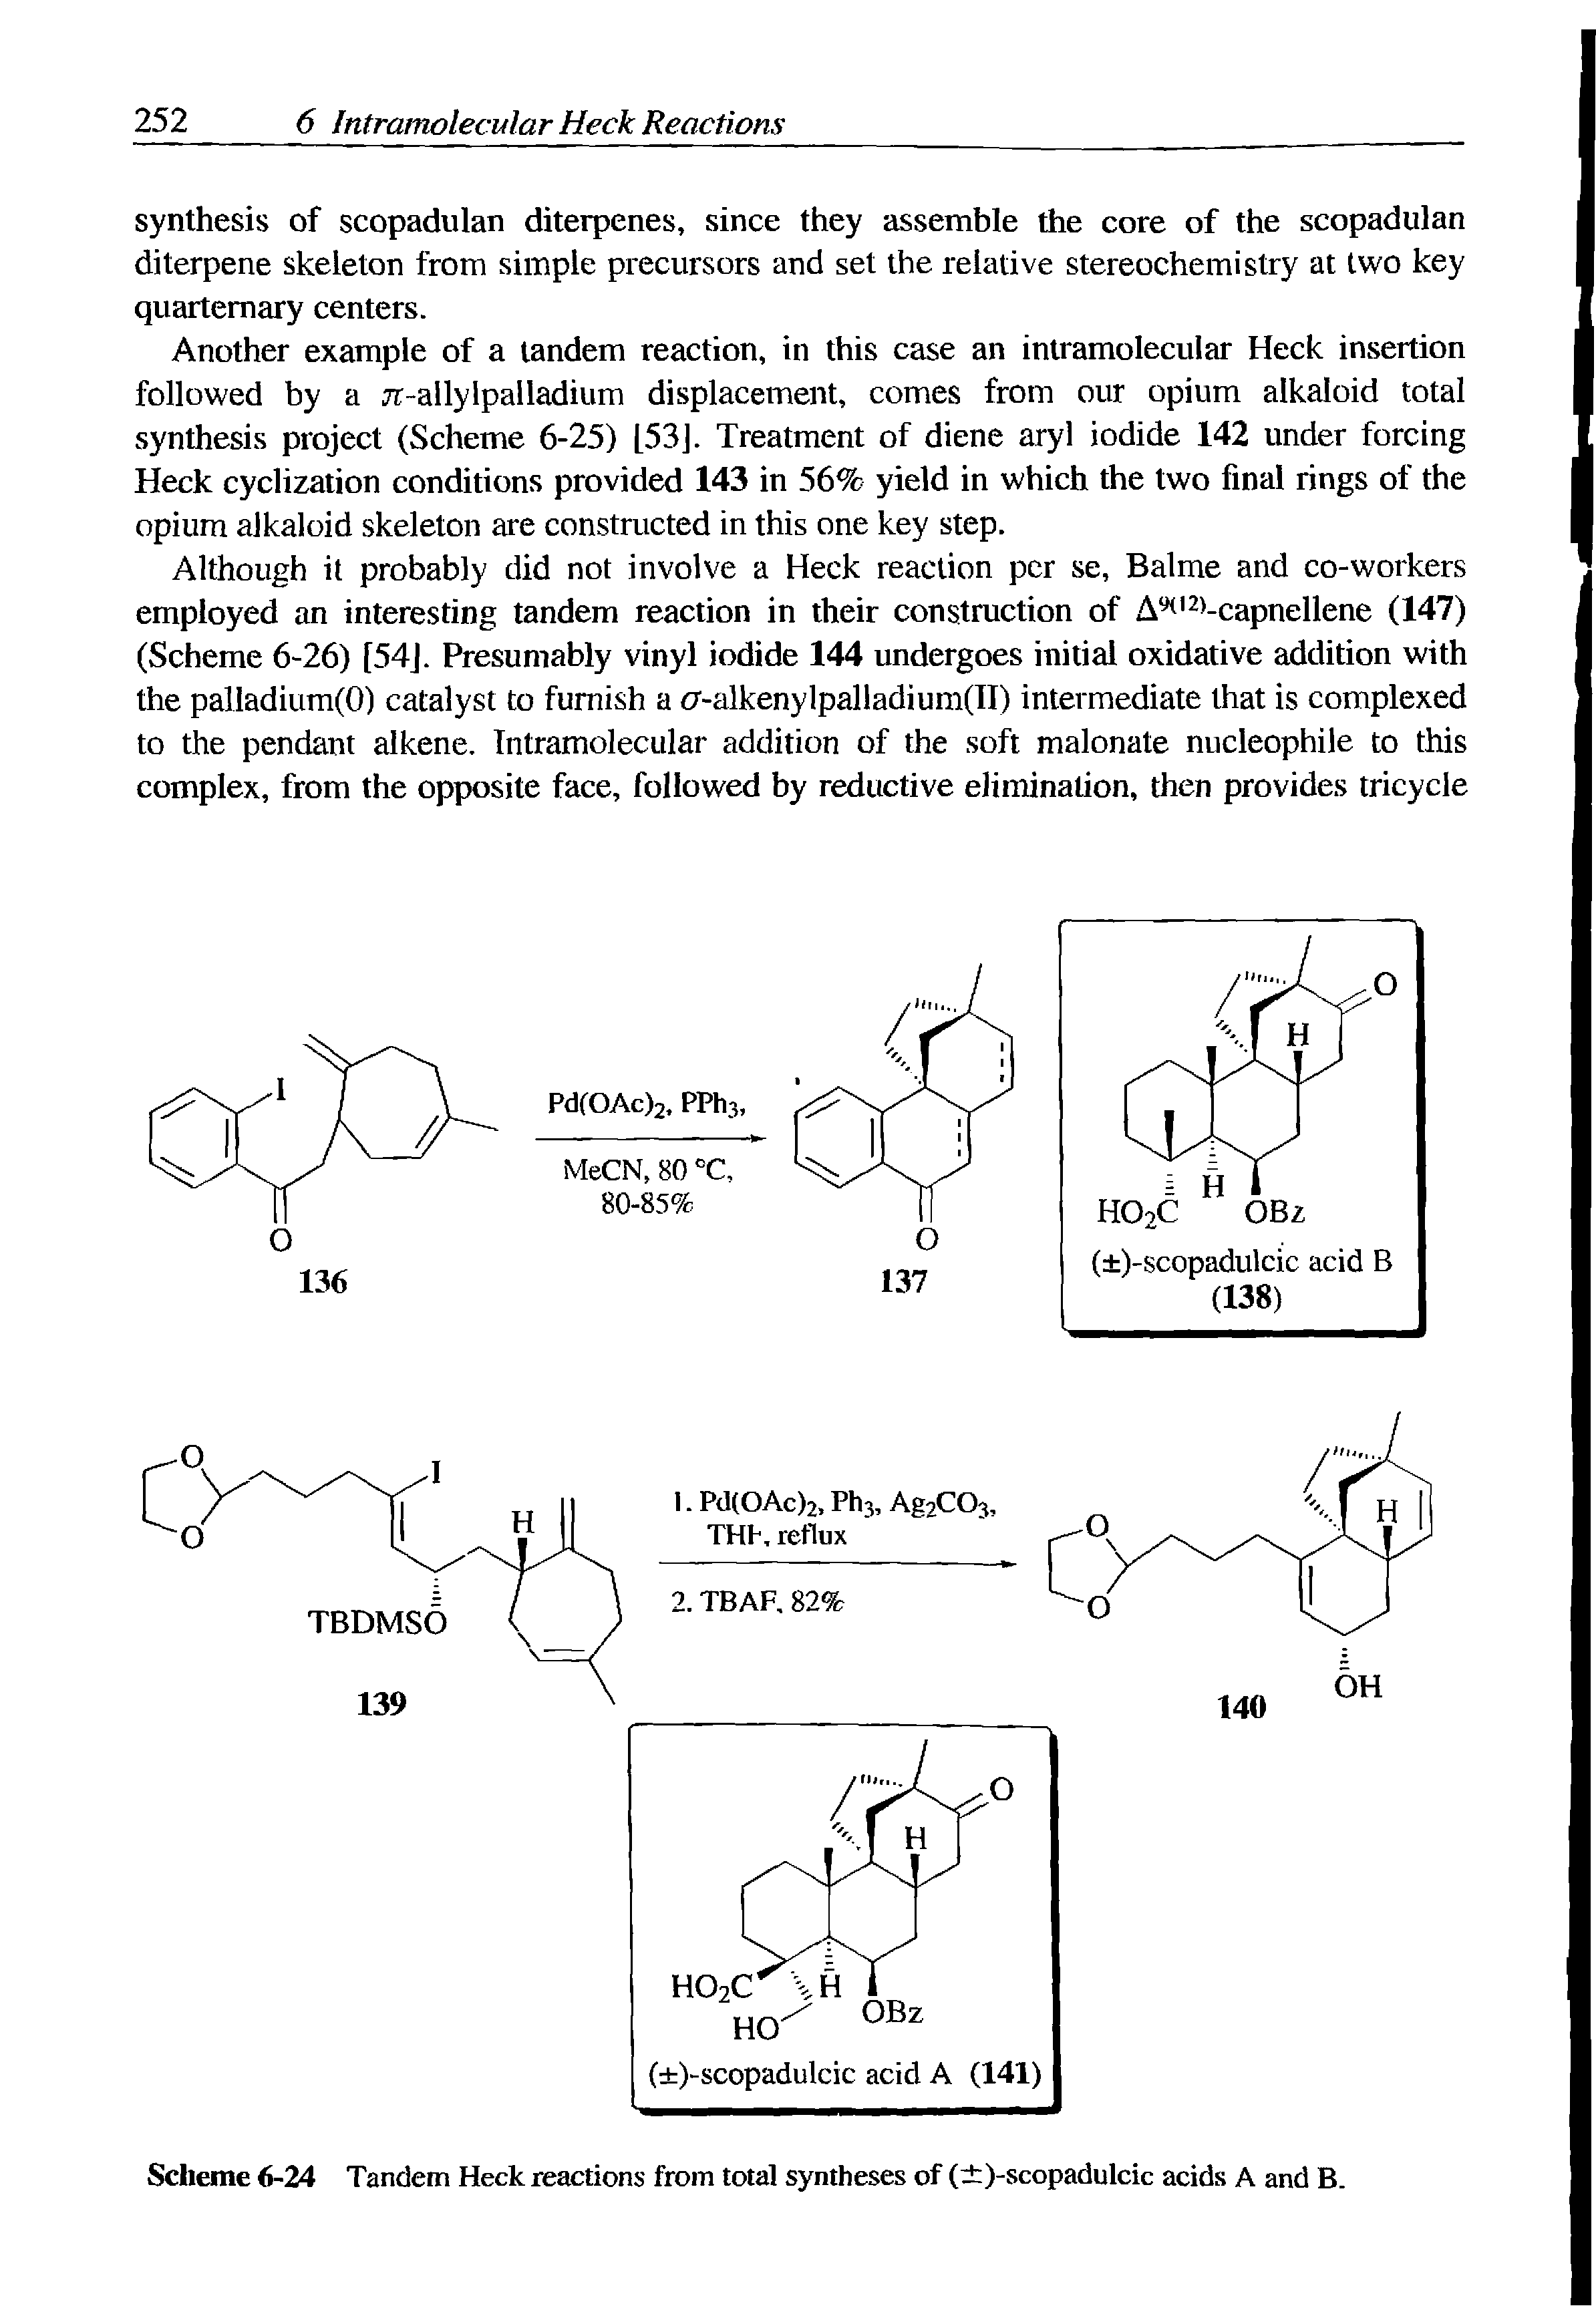 Scheme 6-24 Tandem Heck reactions from total syntheses of ( )-scopadulcic acids A and B.